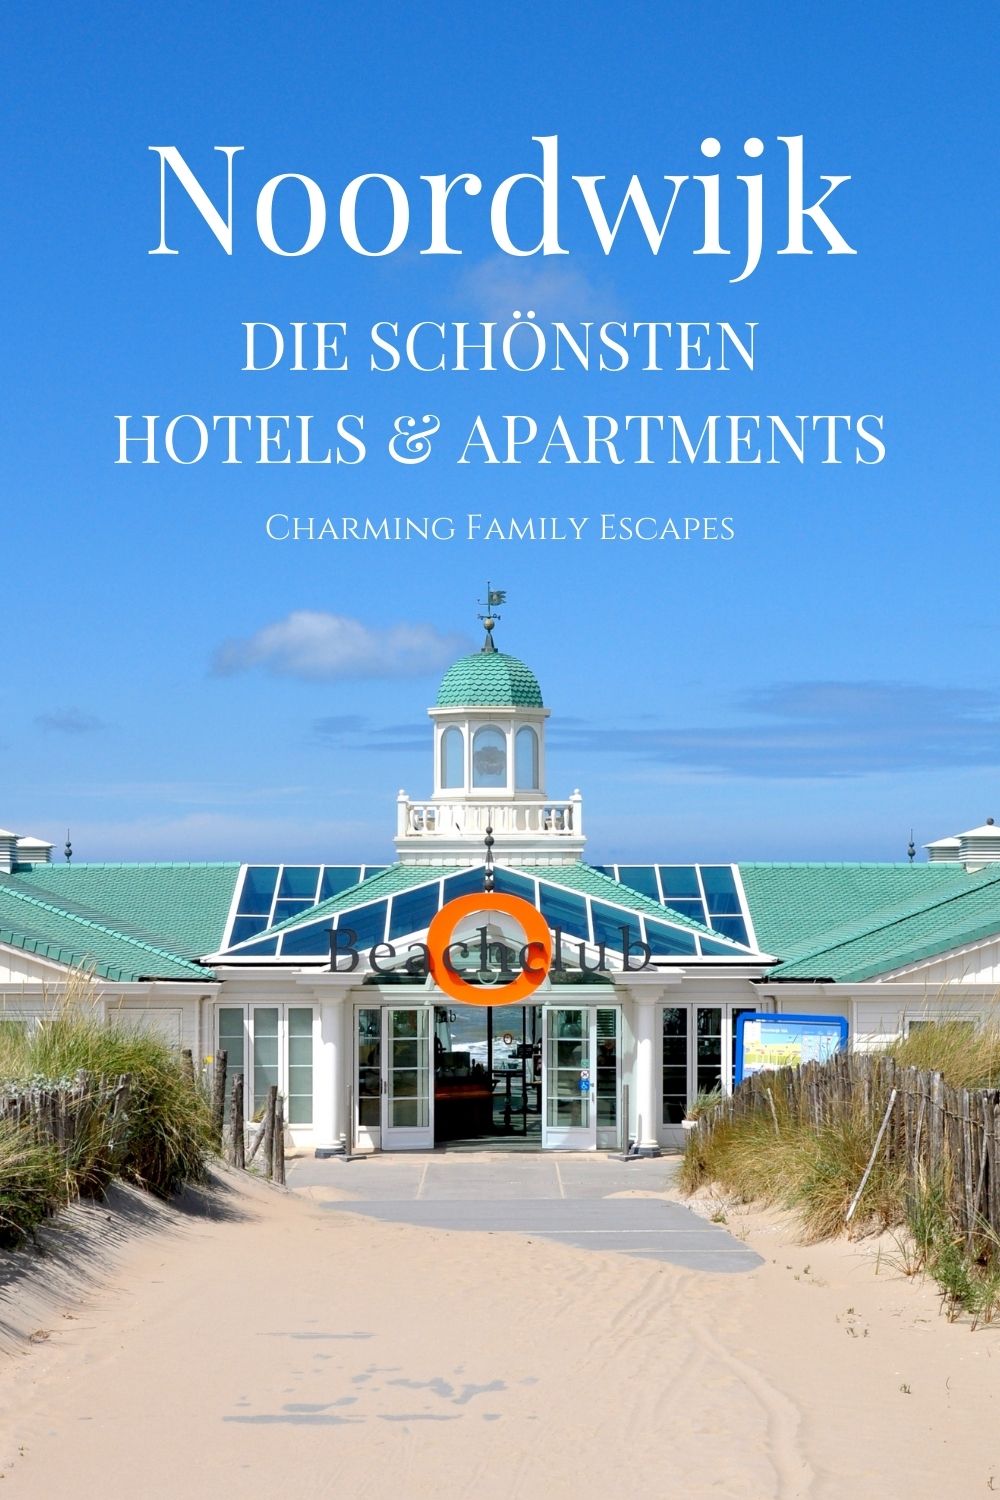 Noordwijk, the most beautiful hotels and apartments on Charming Family Escapes